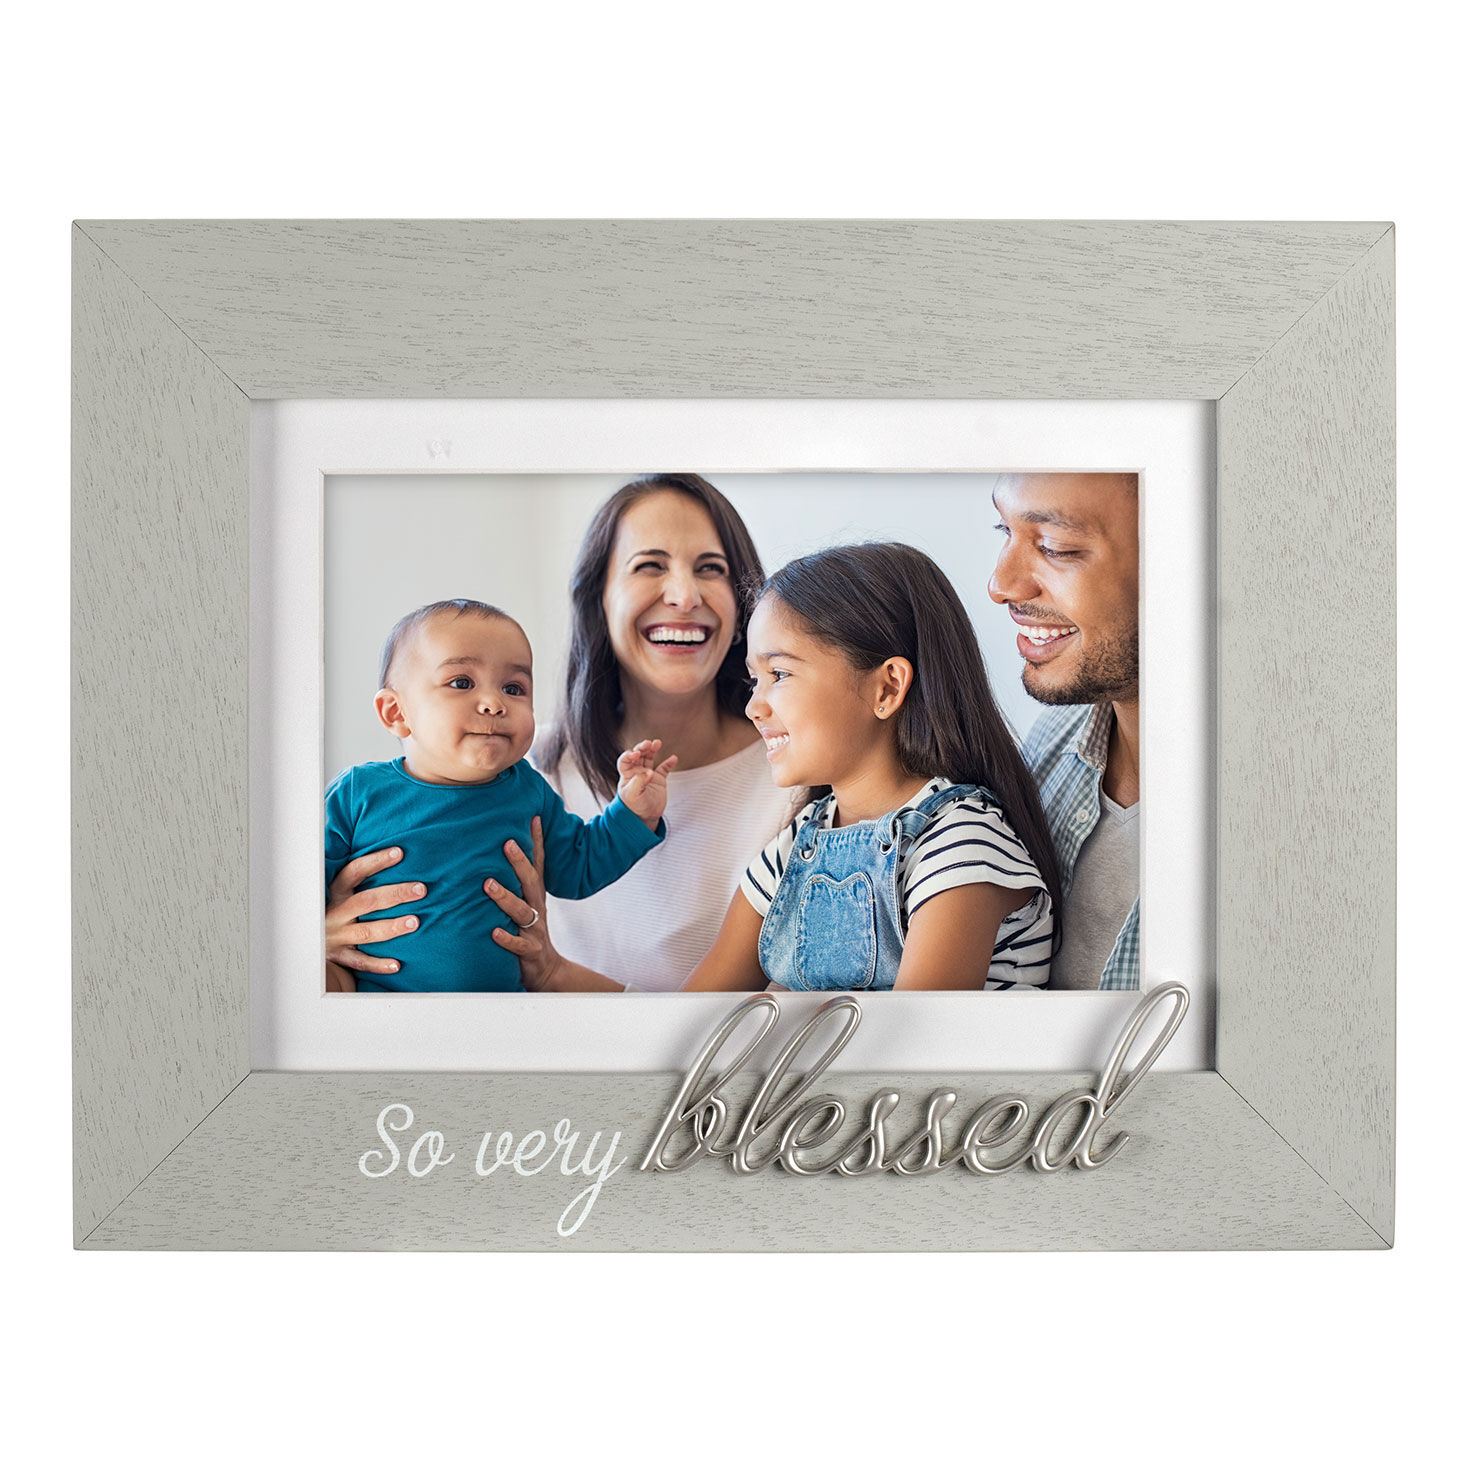 https://www.hallmark.com/dw/image/v2/AALB_PRD/on/demandware.static/-/Sites-hallmark-master/default/dw6529b23e/images/finished-goods/products/340346/So-Very-Blessed-Picture-Frame_340346_01.jpg?sfrm=jpg